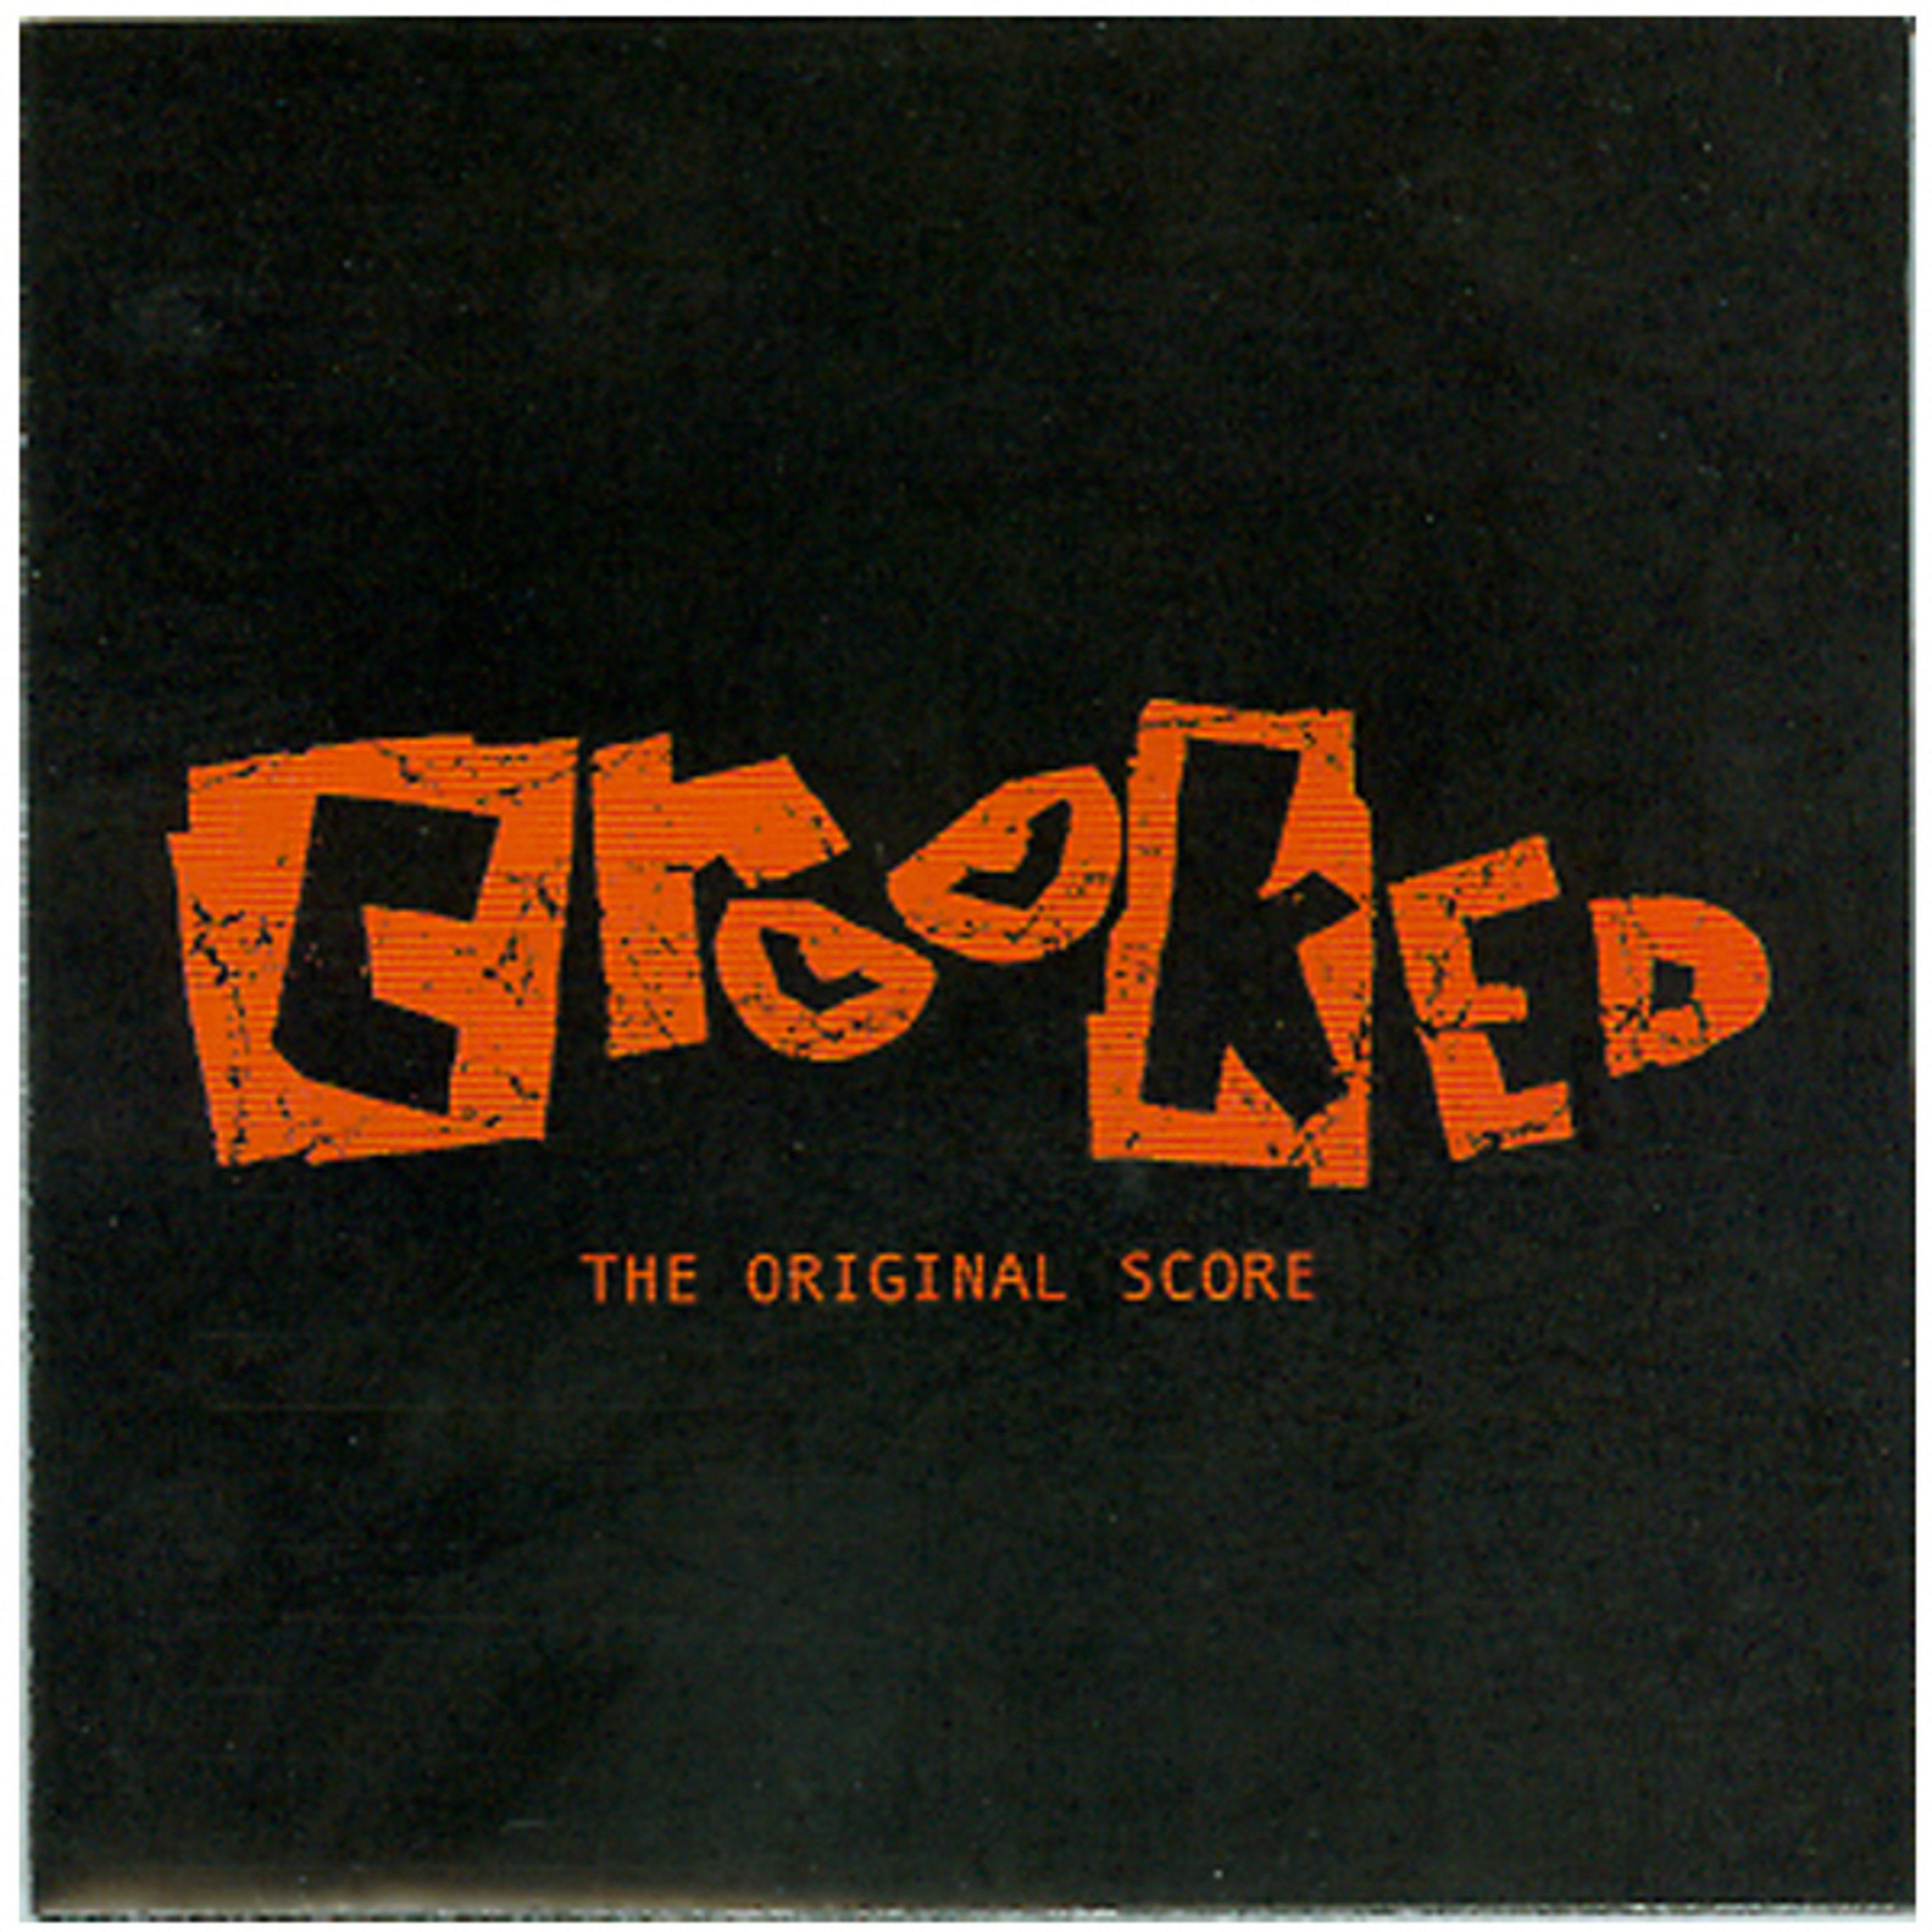 Crooked: The Score